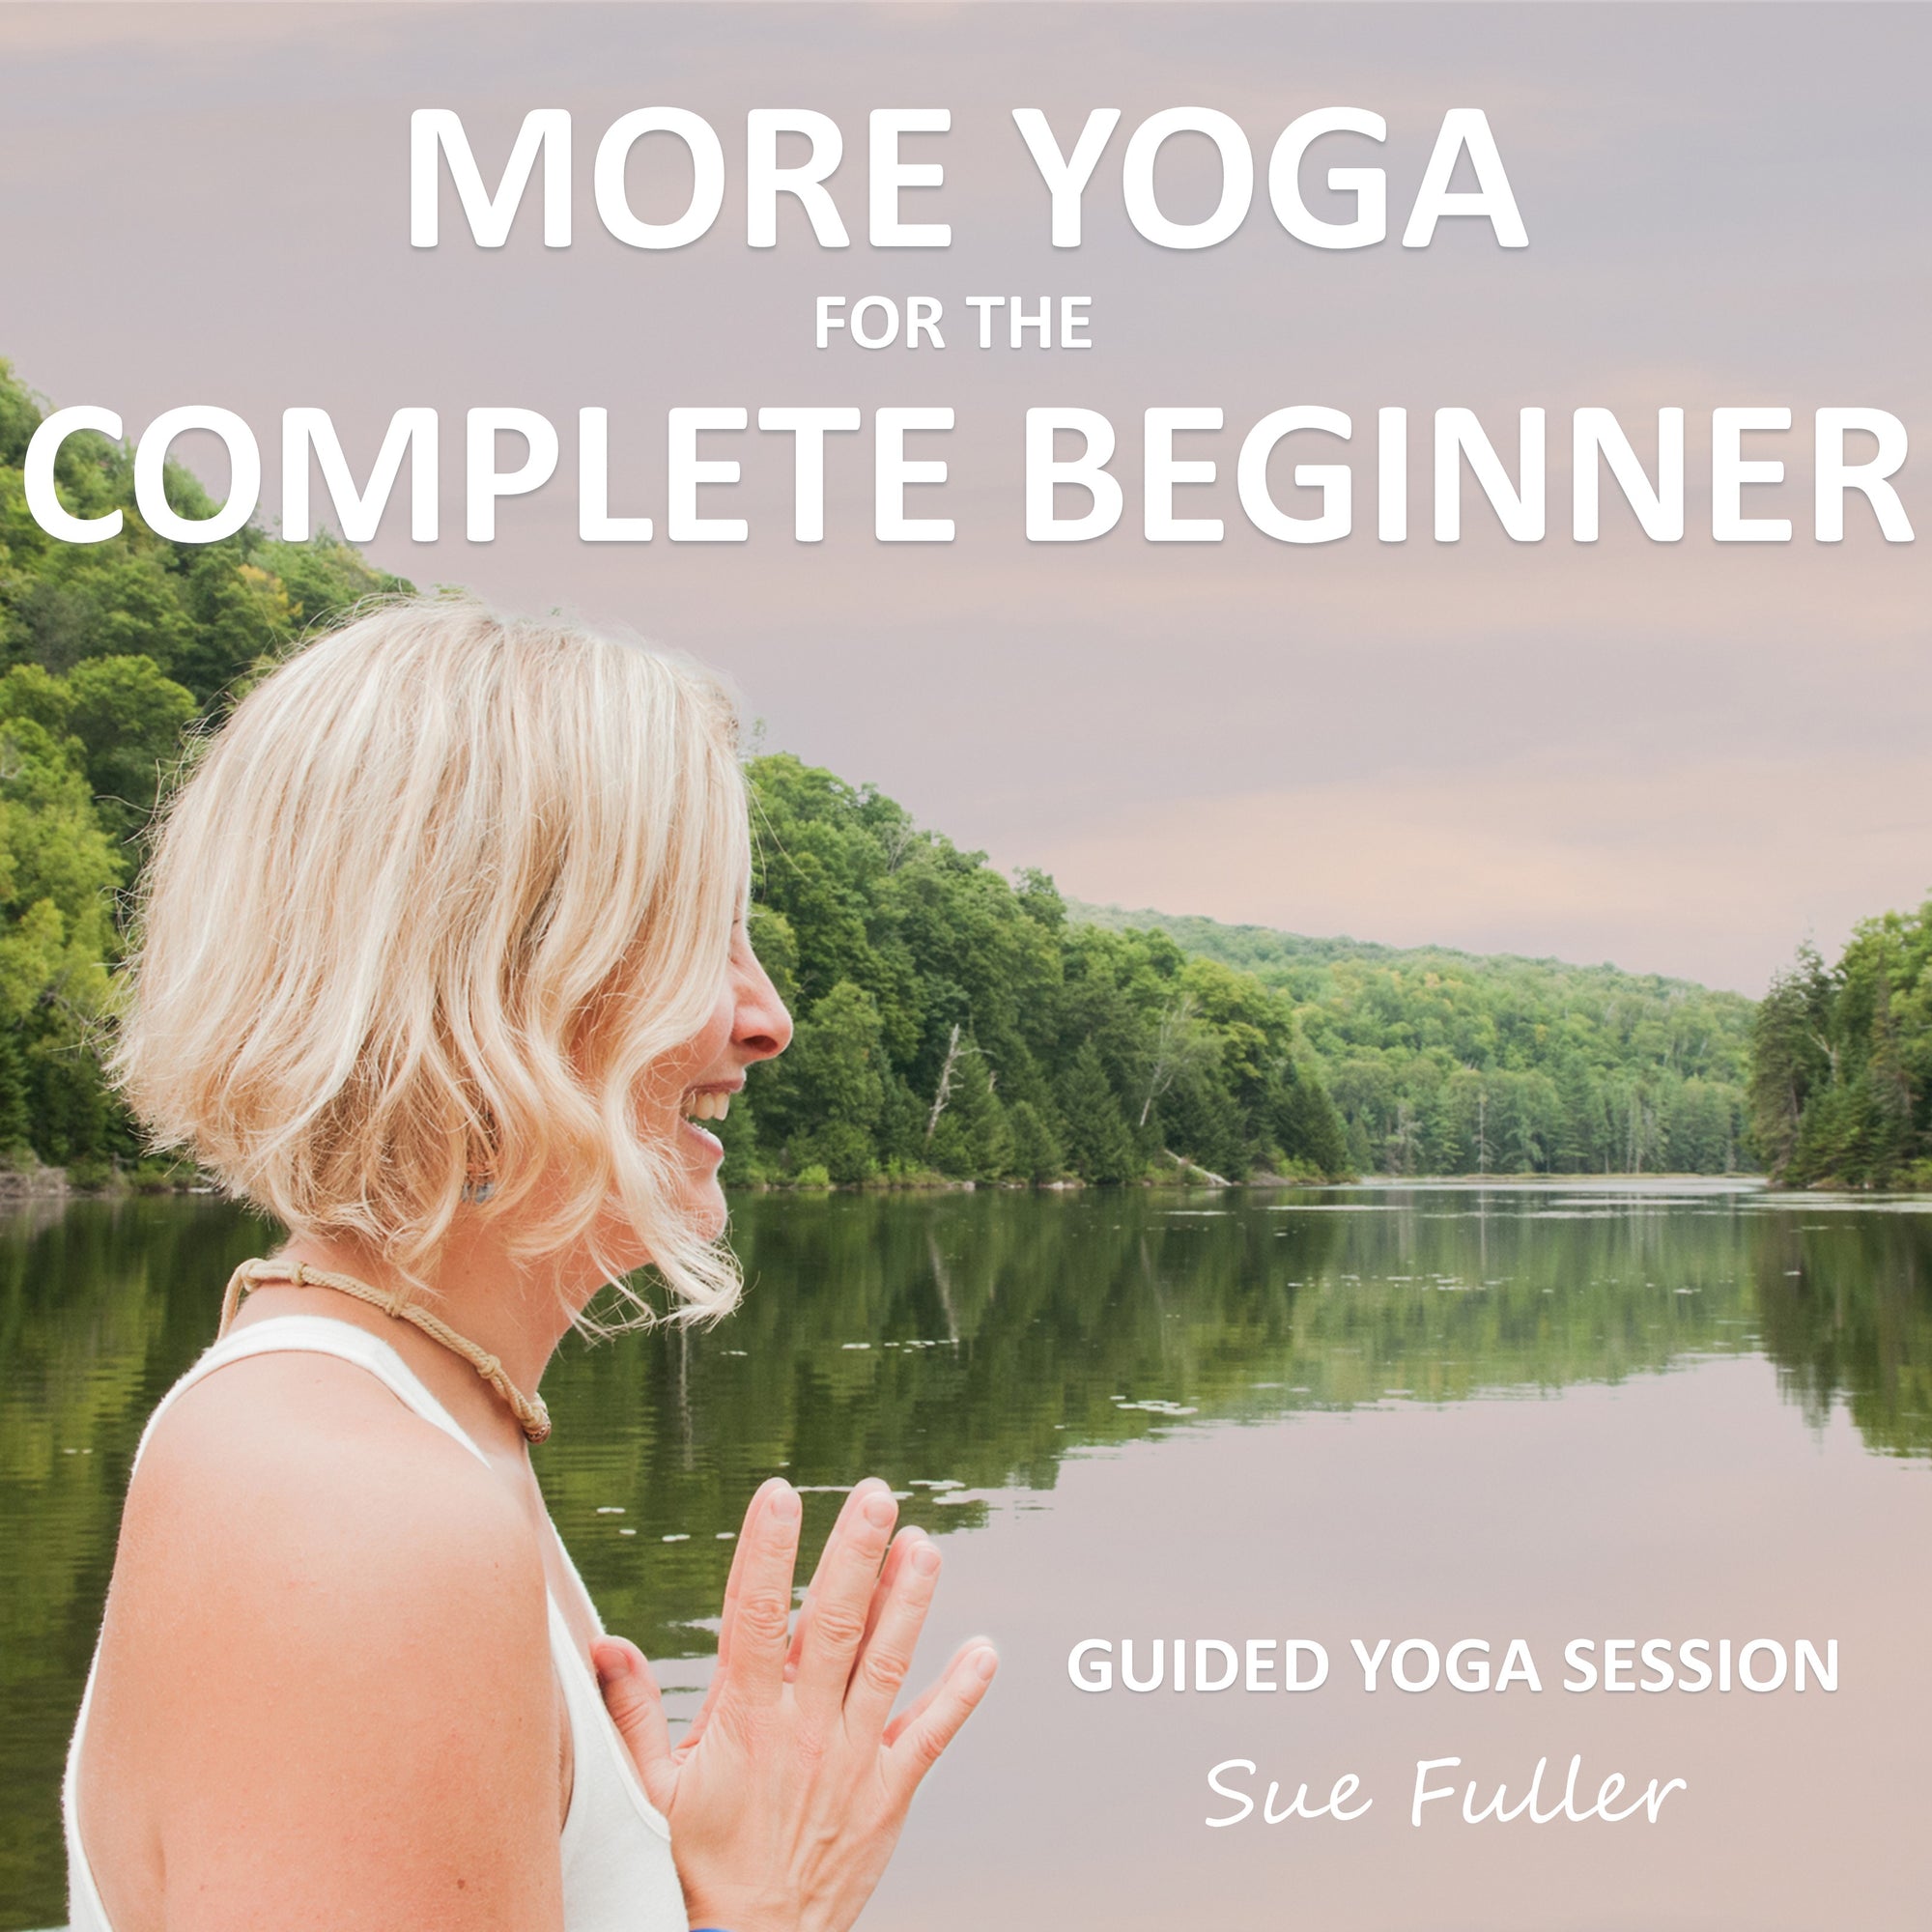 More Yoga for the Complete Beginner